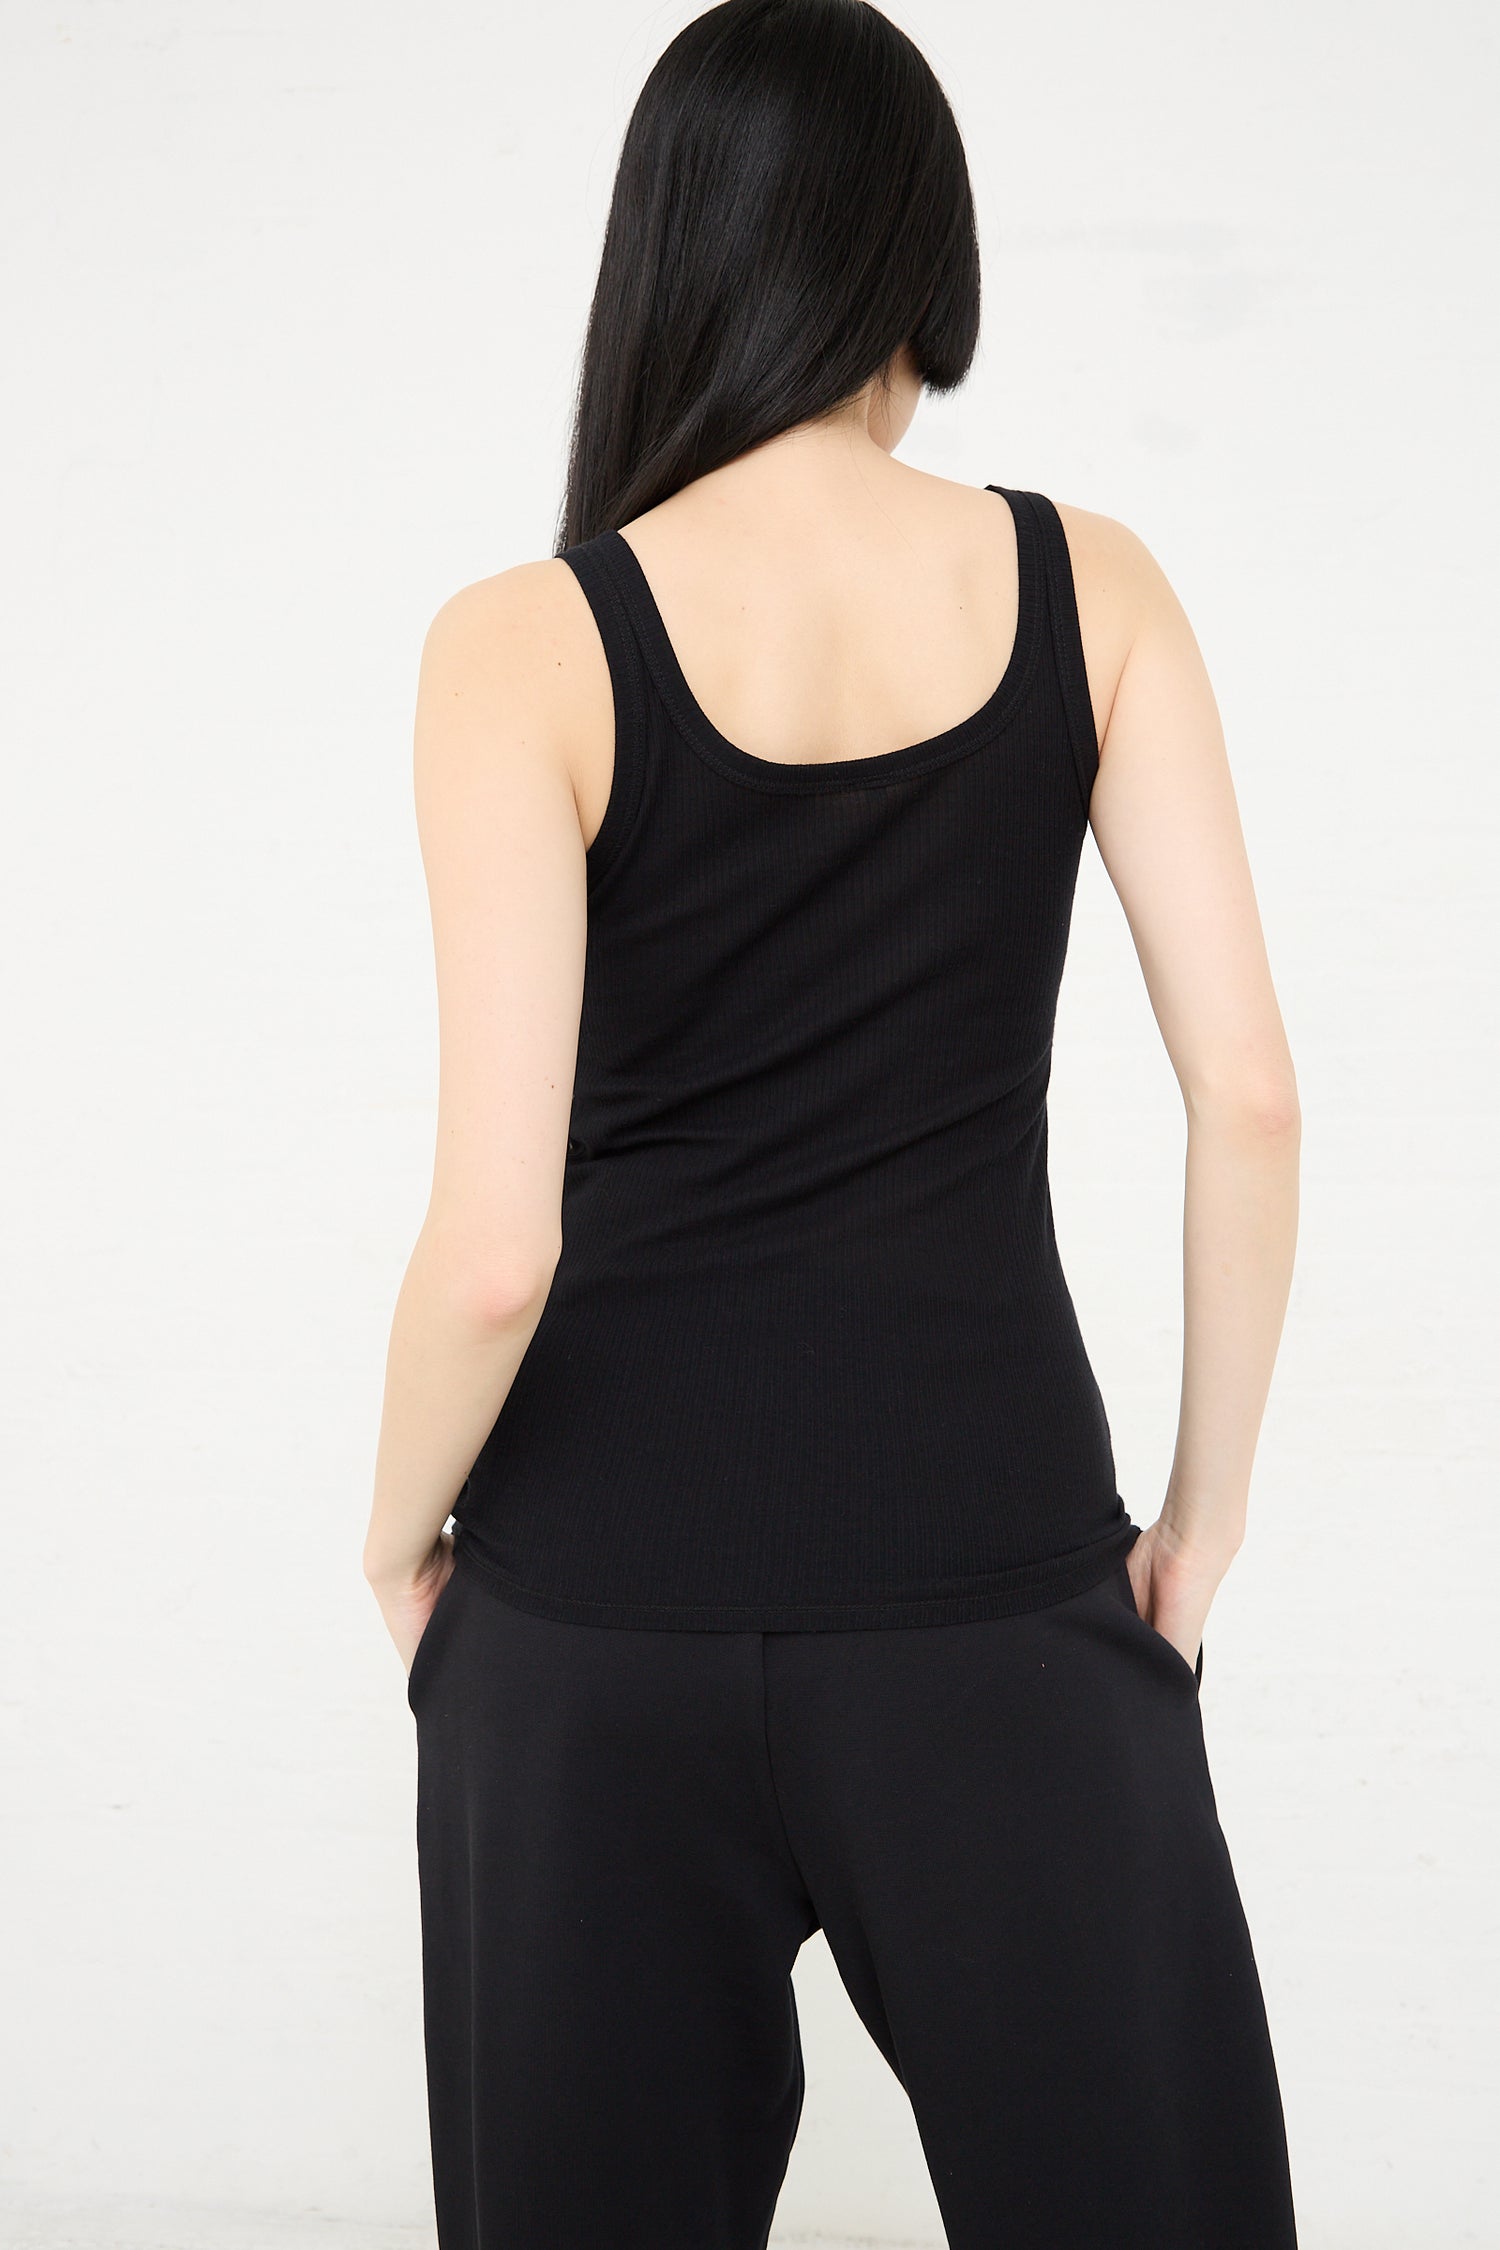 Woman from behind, wearing a Baserange Organic Cotton Rib Drive Tank in Black and black pants, standing against a white background.